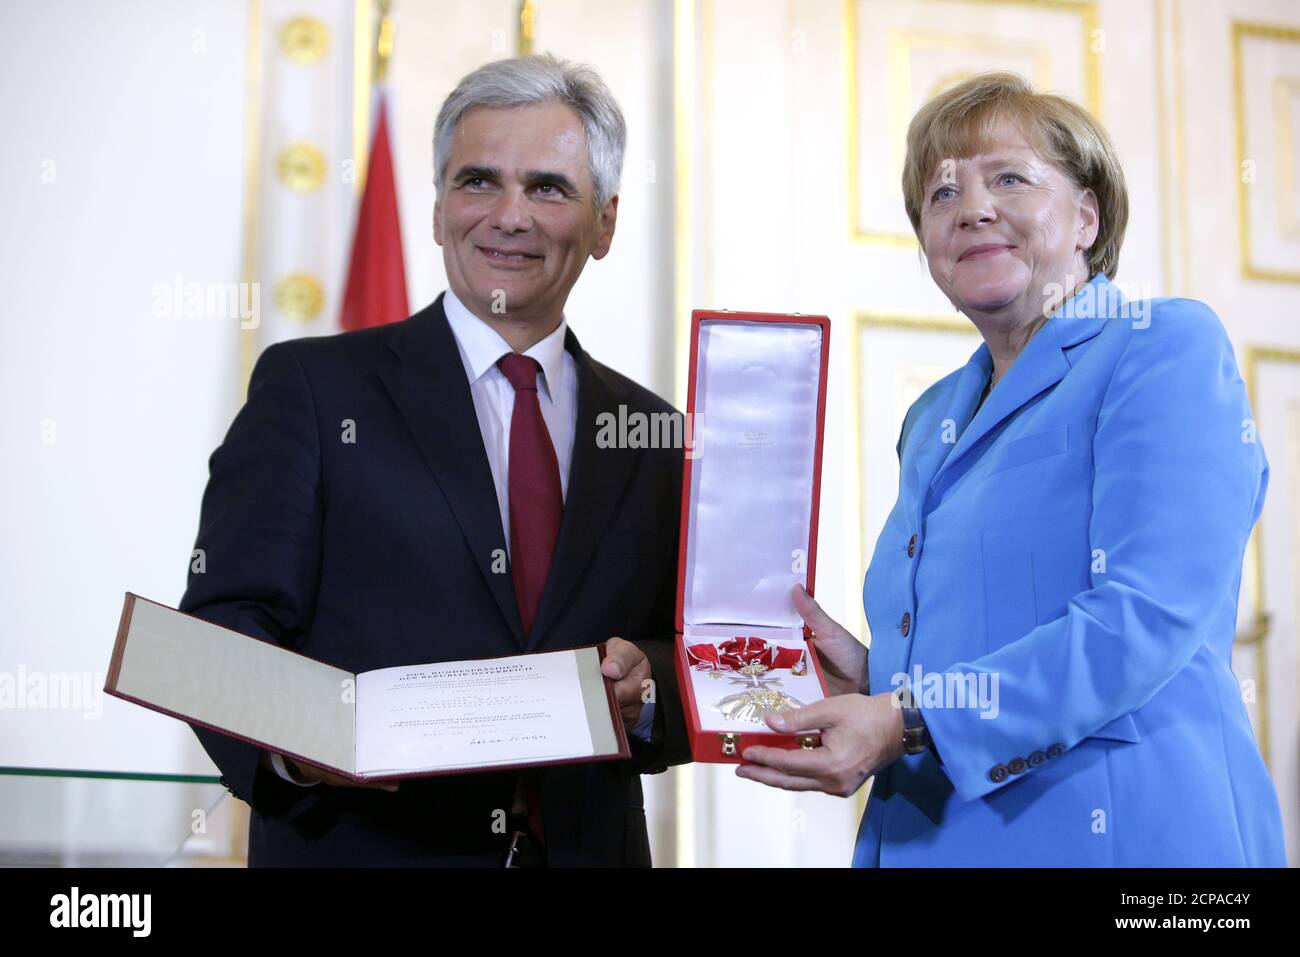 German Chancellor Angela Merkel receives the Golden Decoration of Honour for Services to the Republic of Austria from Austrian Chancellor Werner Faymann during the Western Balkans Summit in Vienna August 27, 2015.   REUTERS/Lisi Niesner Stock Photo